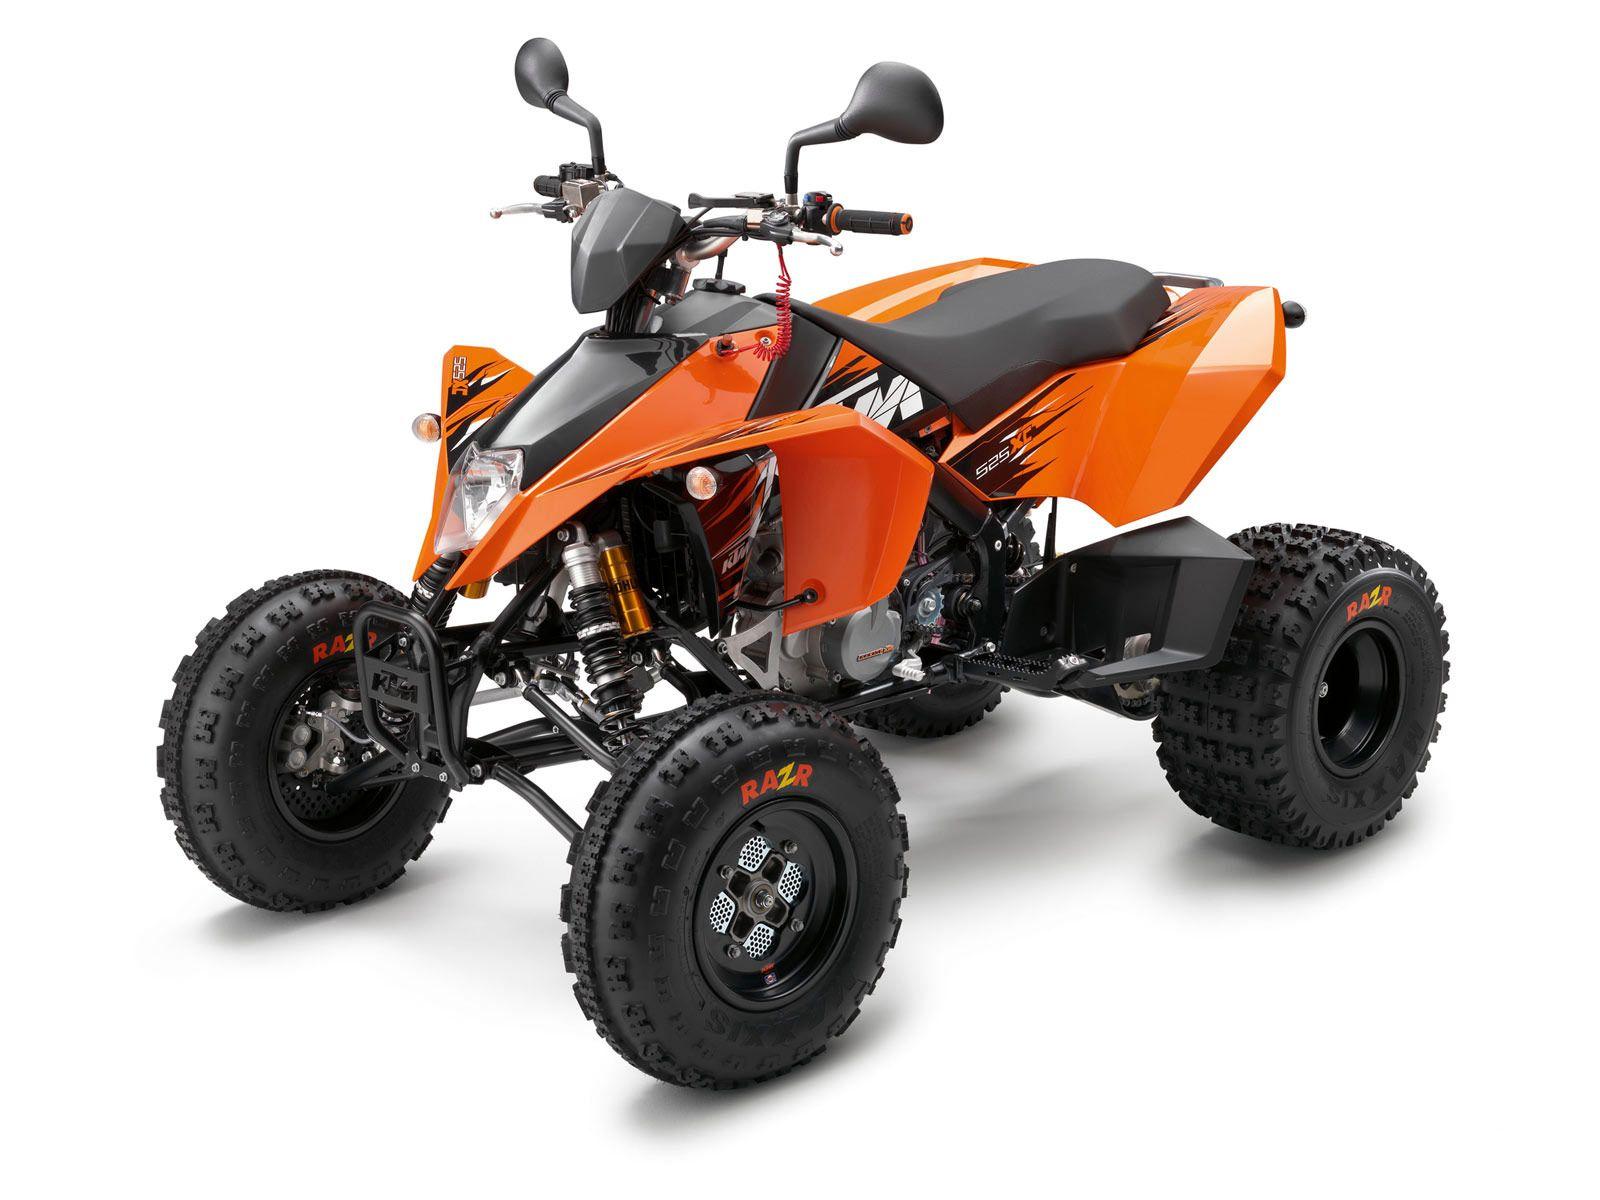 KTM 525 XC wallpaper and specifications